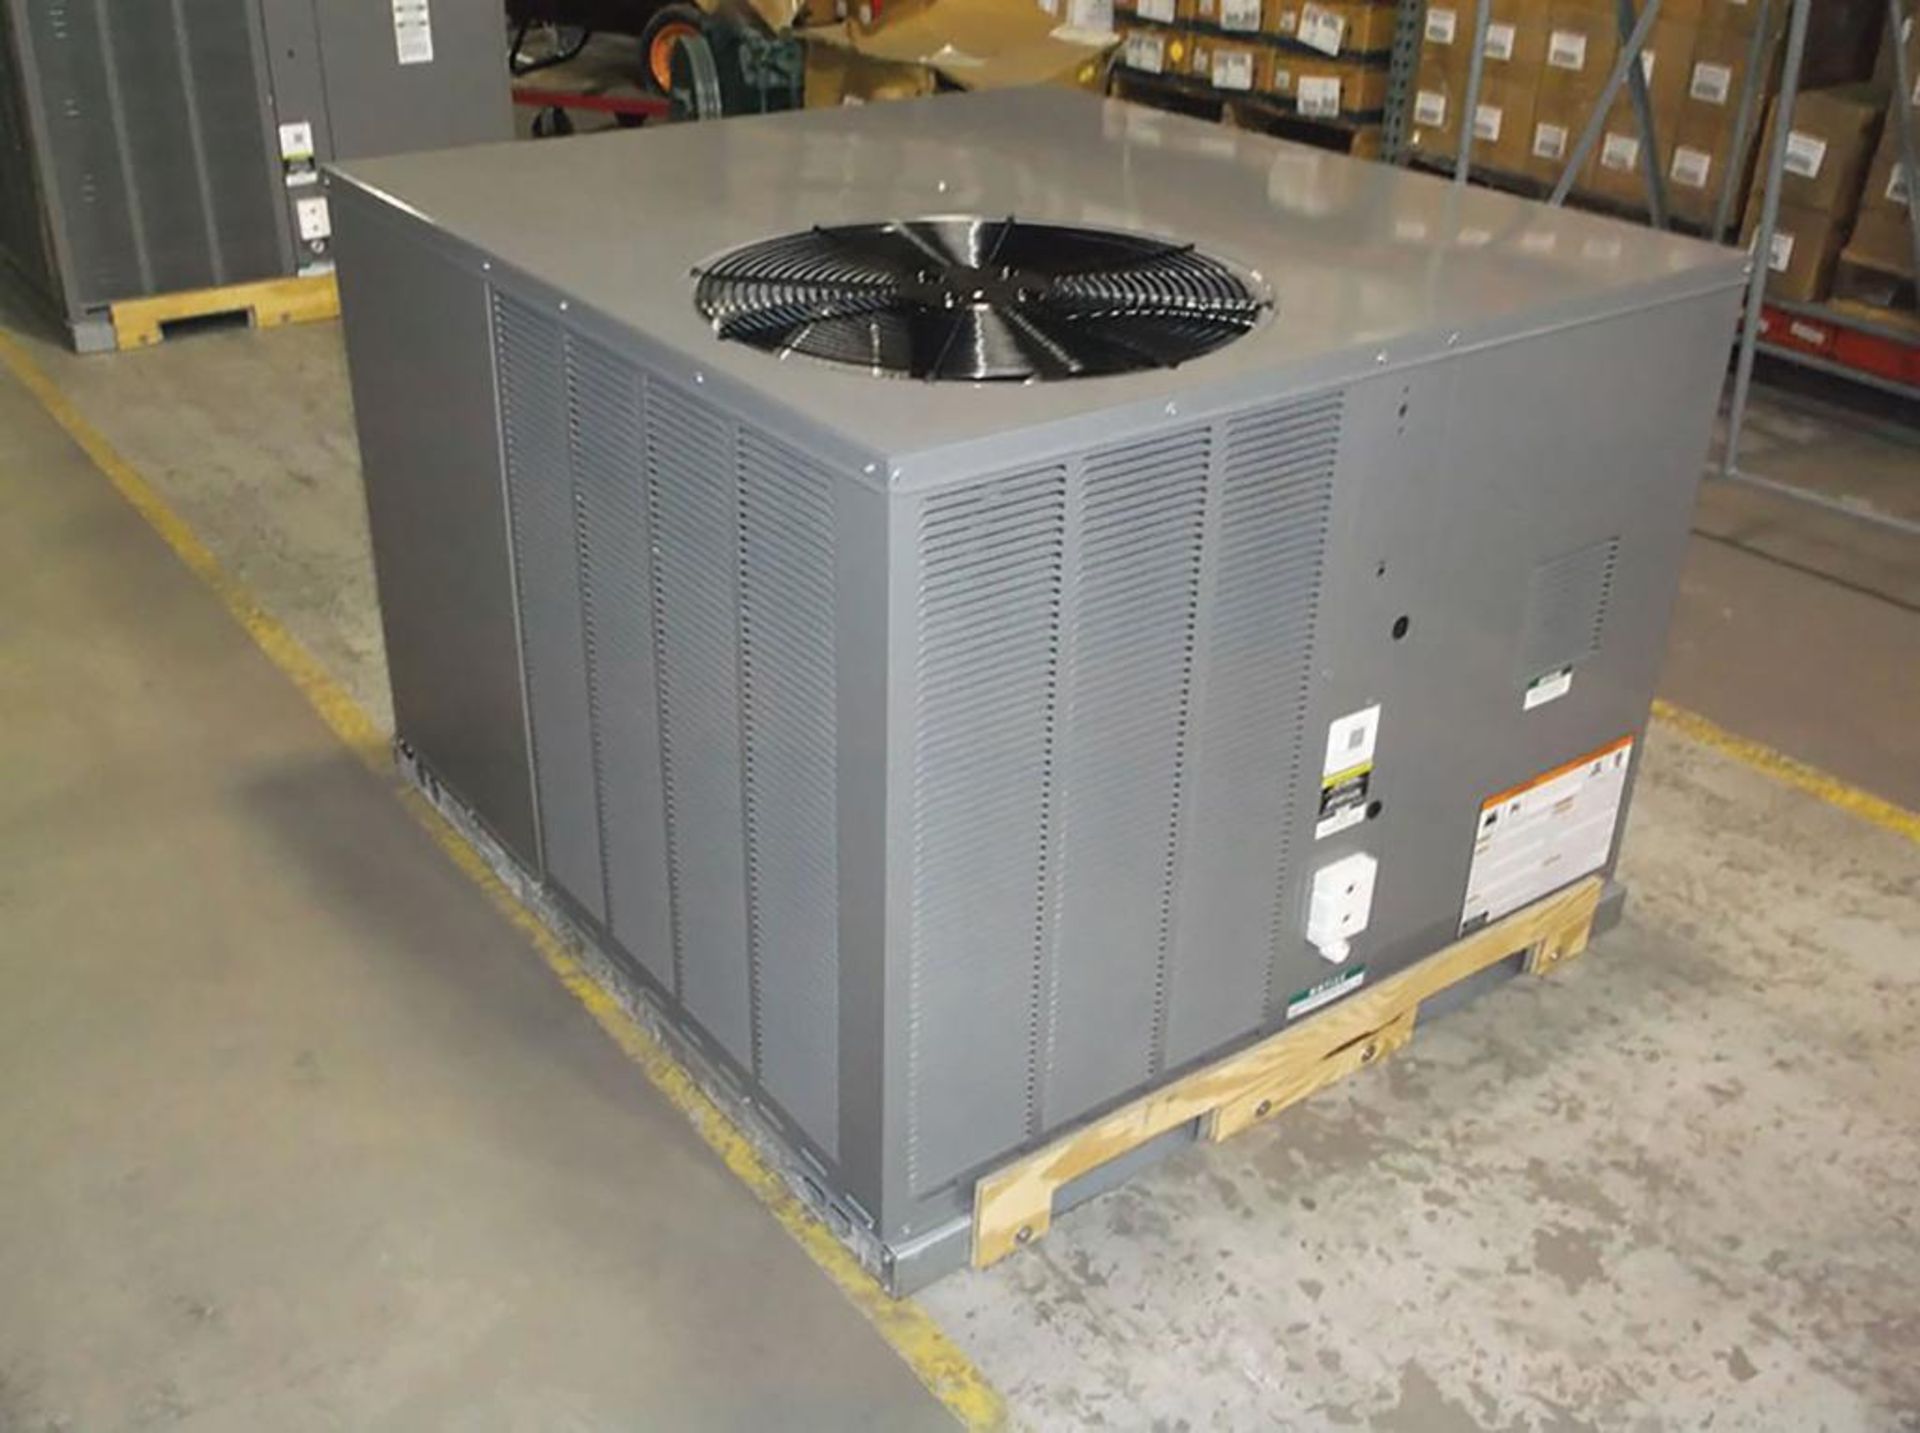 (1) Rheem 2-Ton Convertible Rooftop Direct Drive Gas/Electric Nox Package Unit, Voltage: 208/230, He